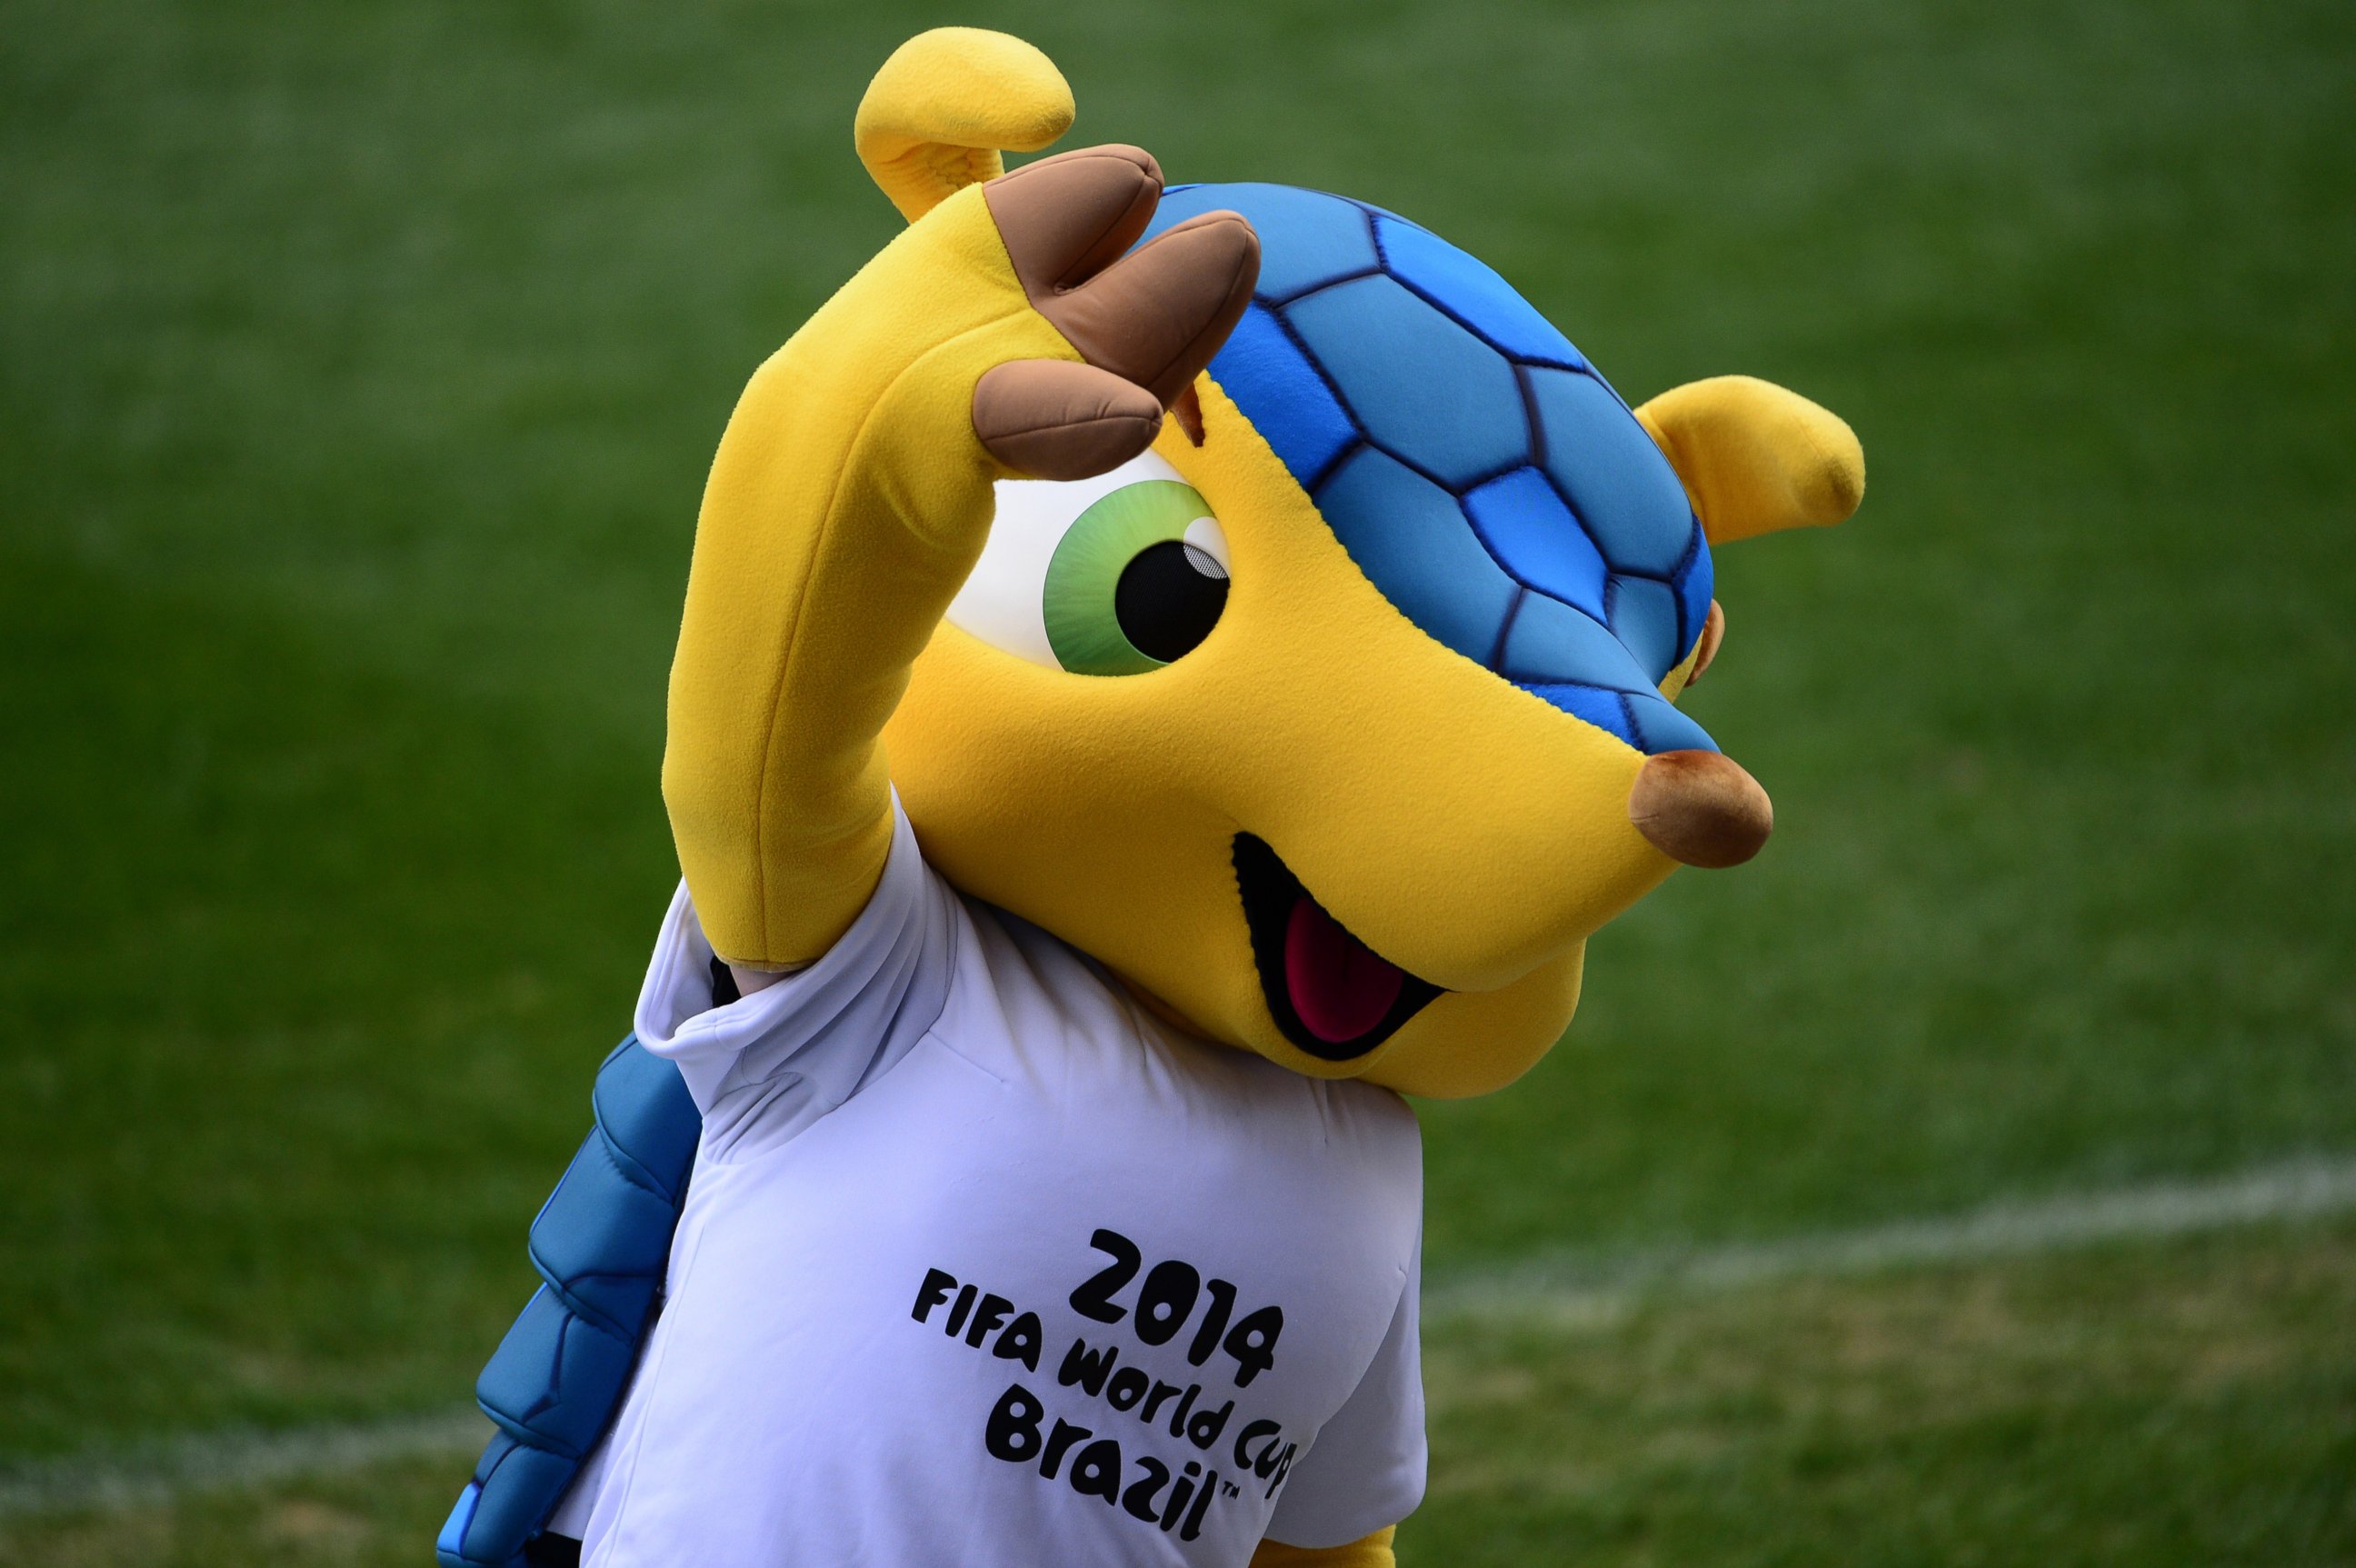 PHOTO: Fuleco the Armadillo, the official mascot of the 2014 FIFA World Cup Brazil